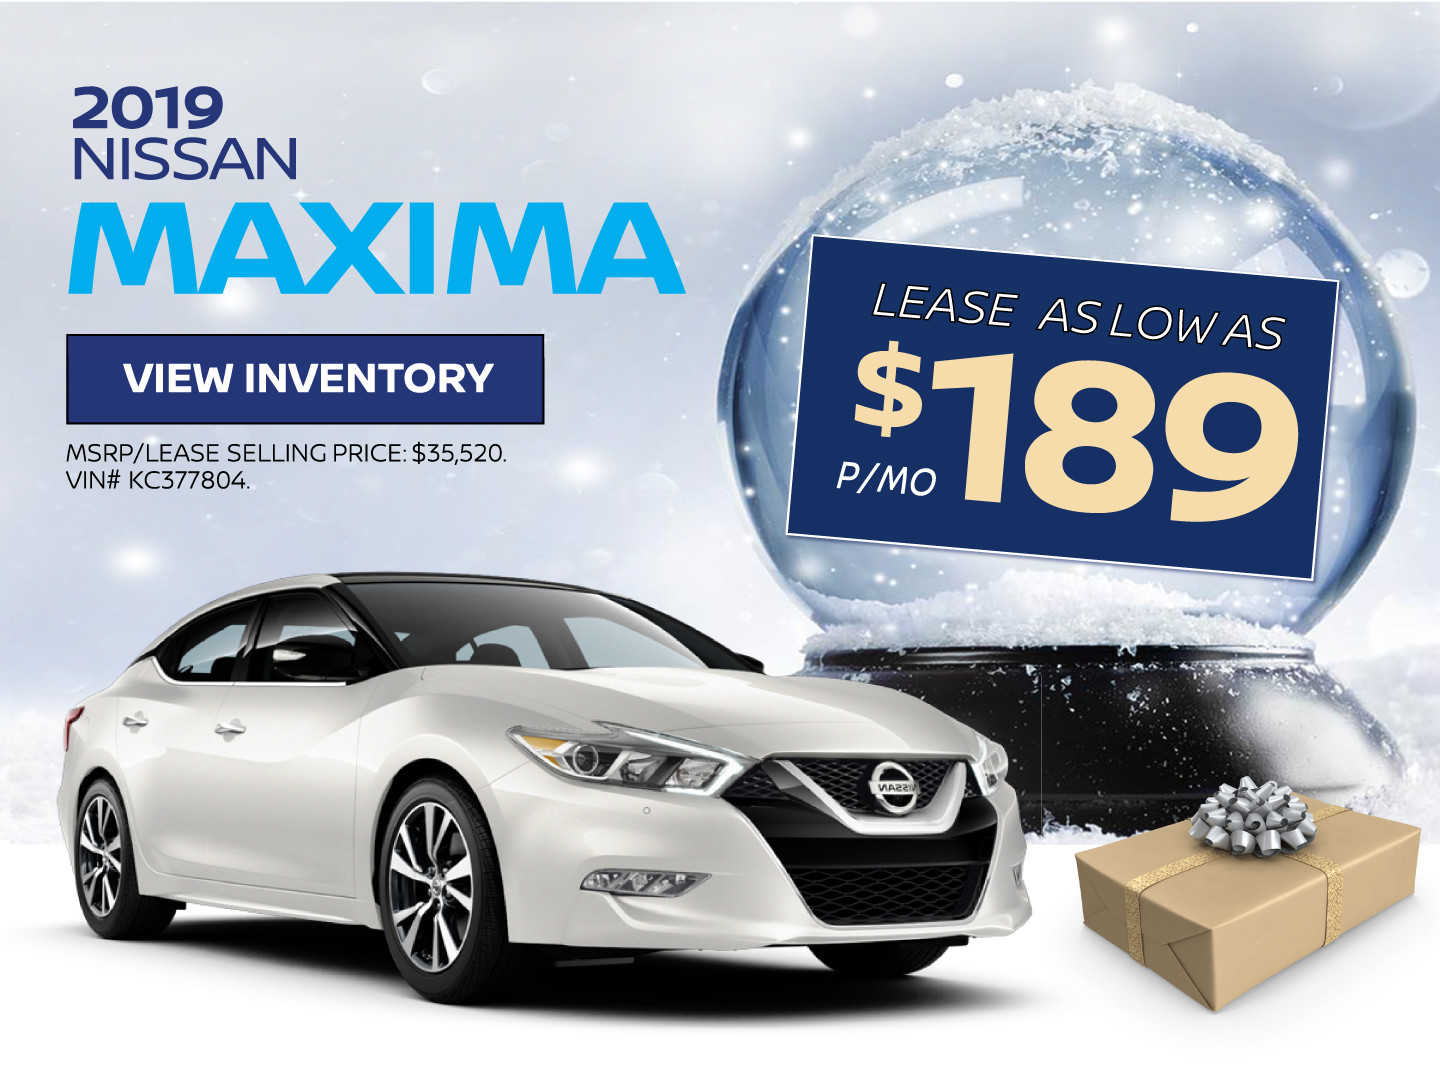 New Nissan Lease Specials